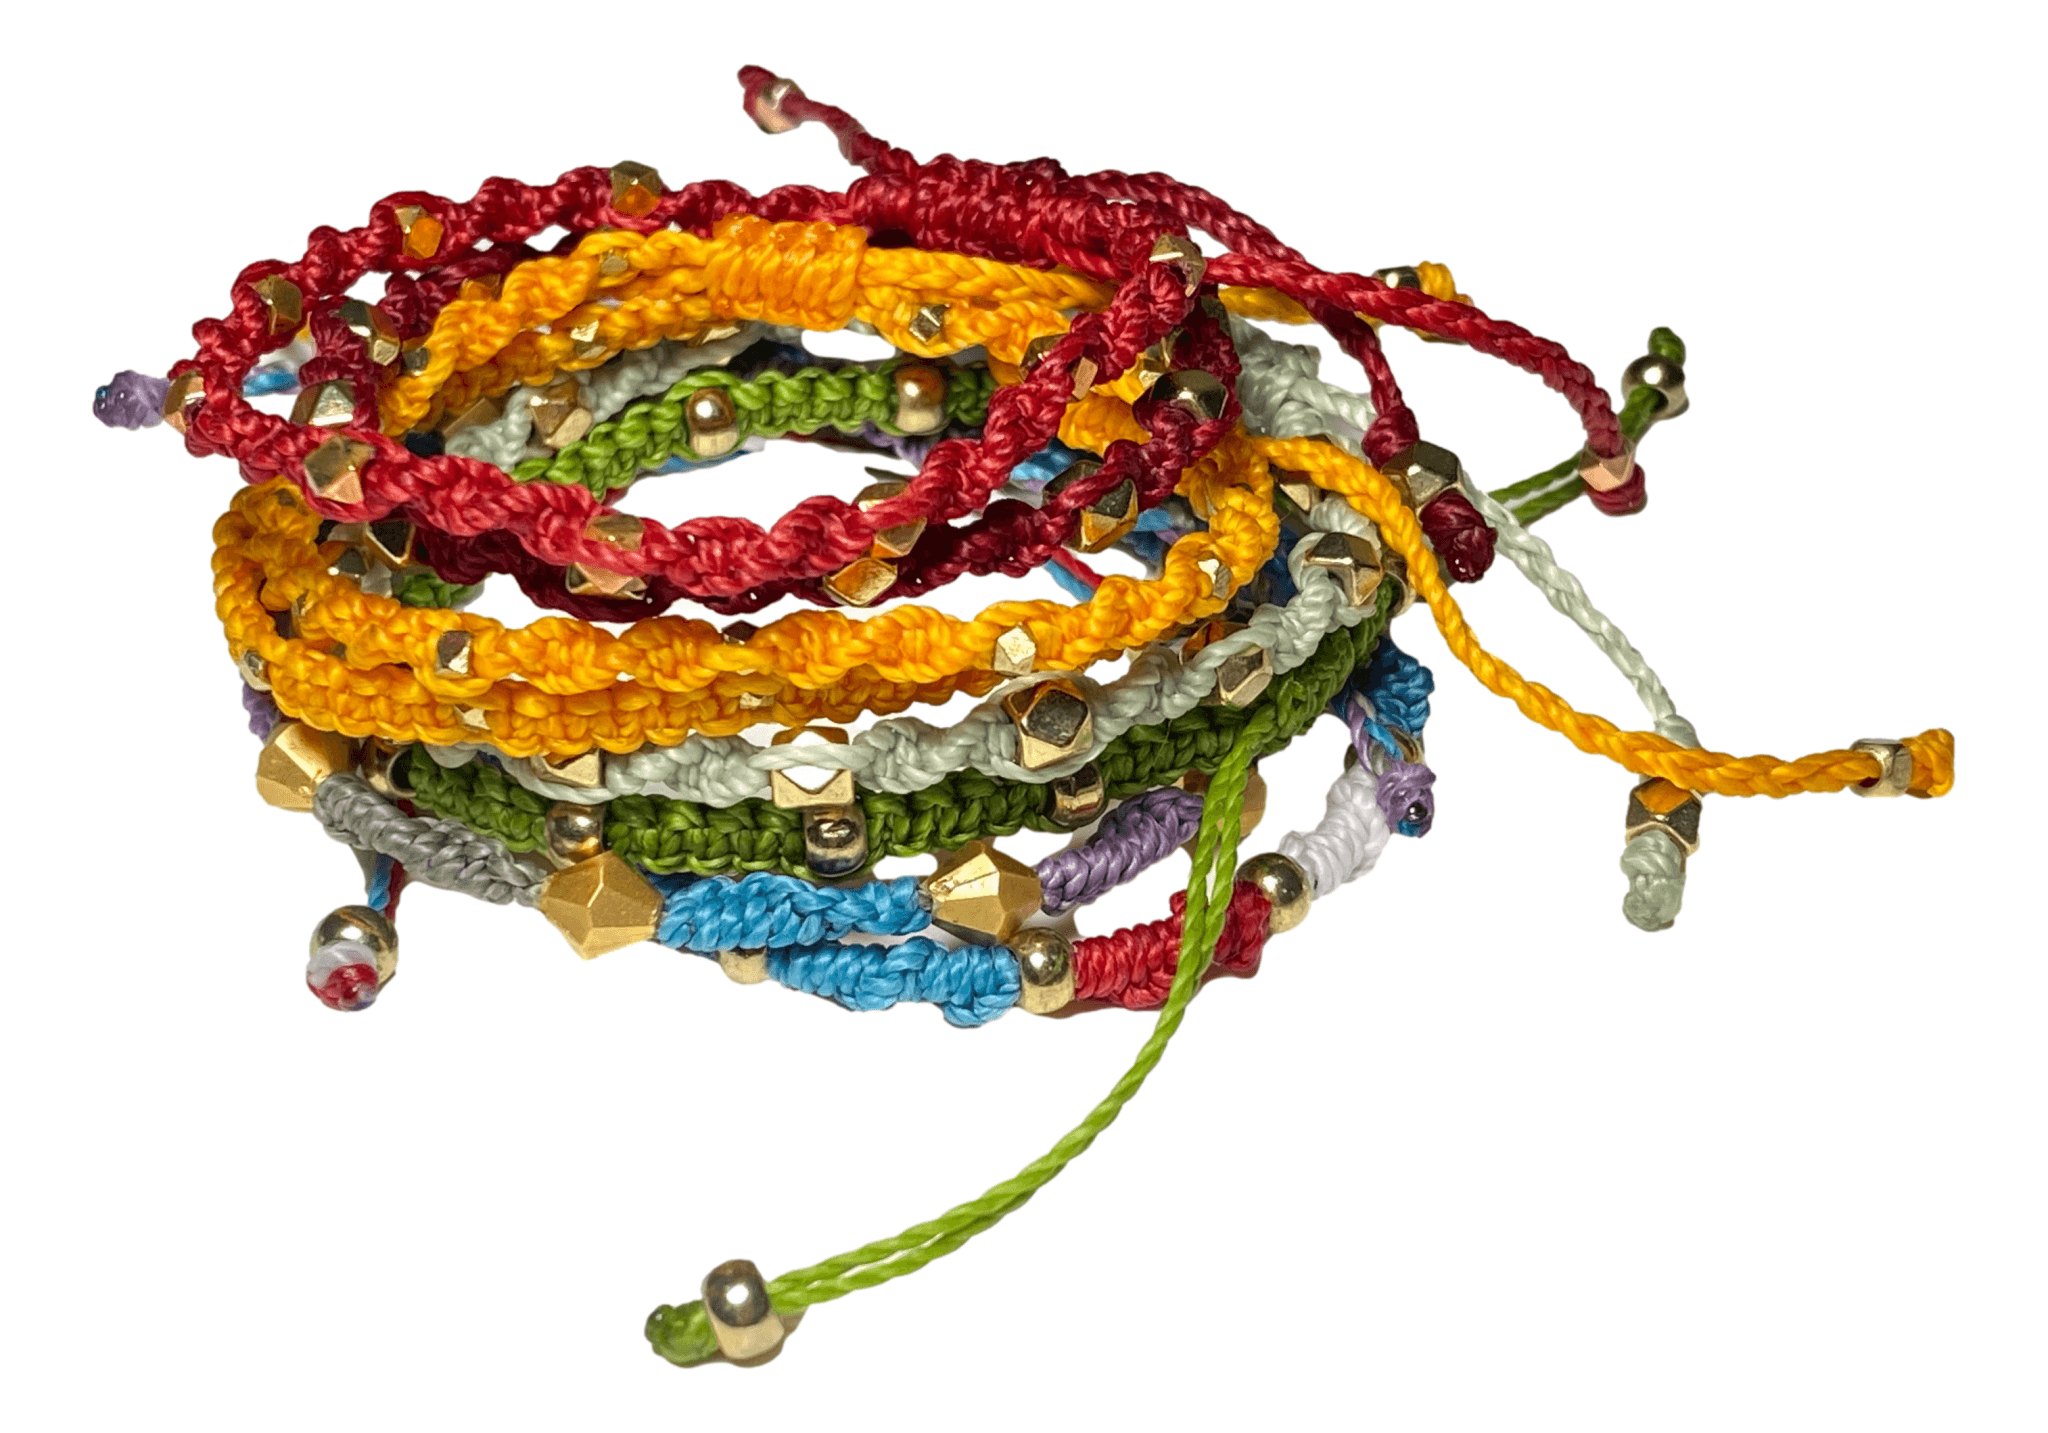 Bracelet Adjustable Assorted Colors Bead Accent Nylon Thread Braidedtyles Handmade by Skilled Artisan - Ysleta Mission Gift Shop- VOTED El Paso's Best Gift Shop